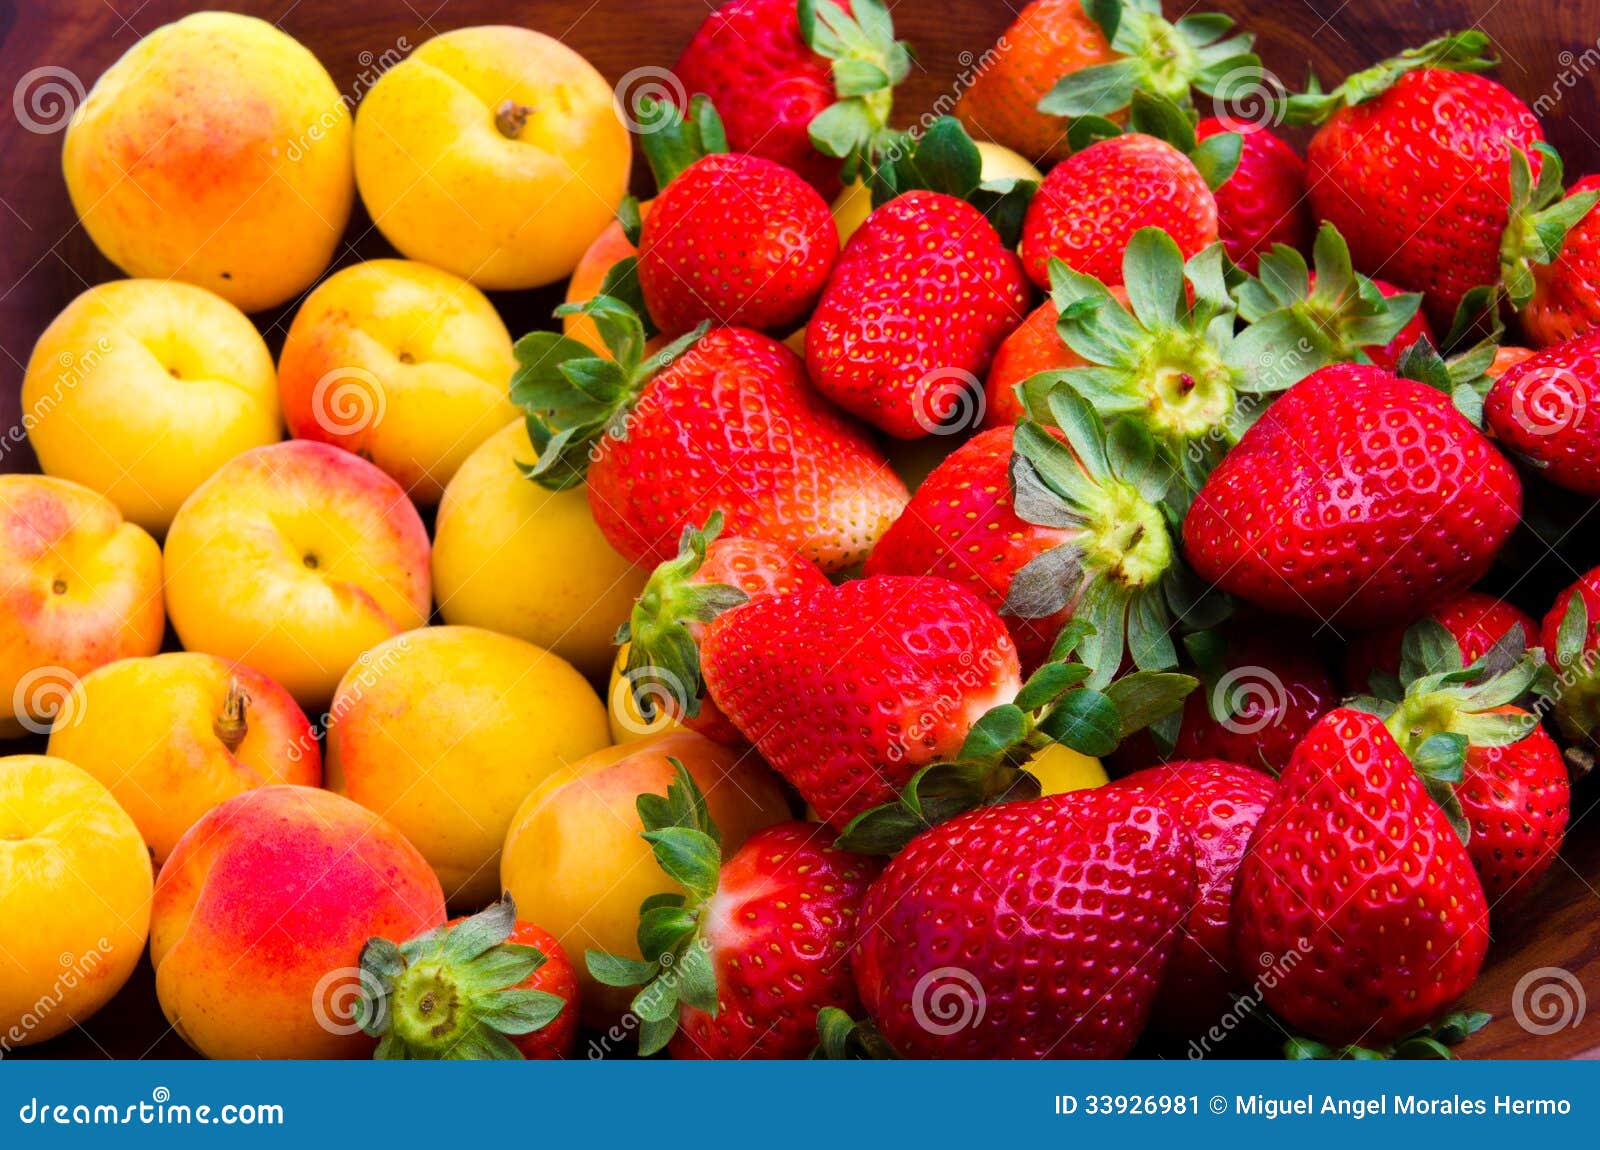 strawberries and apricots